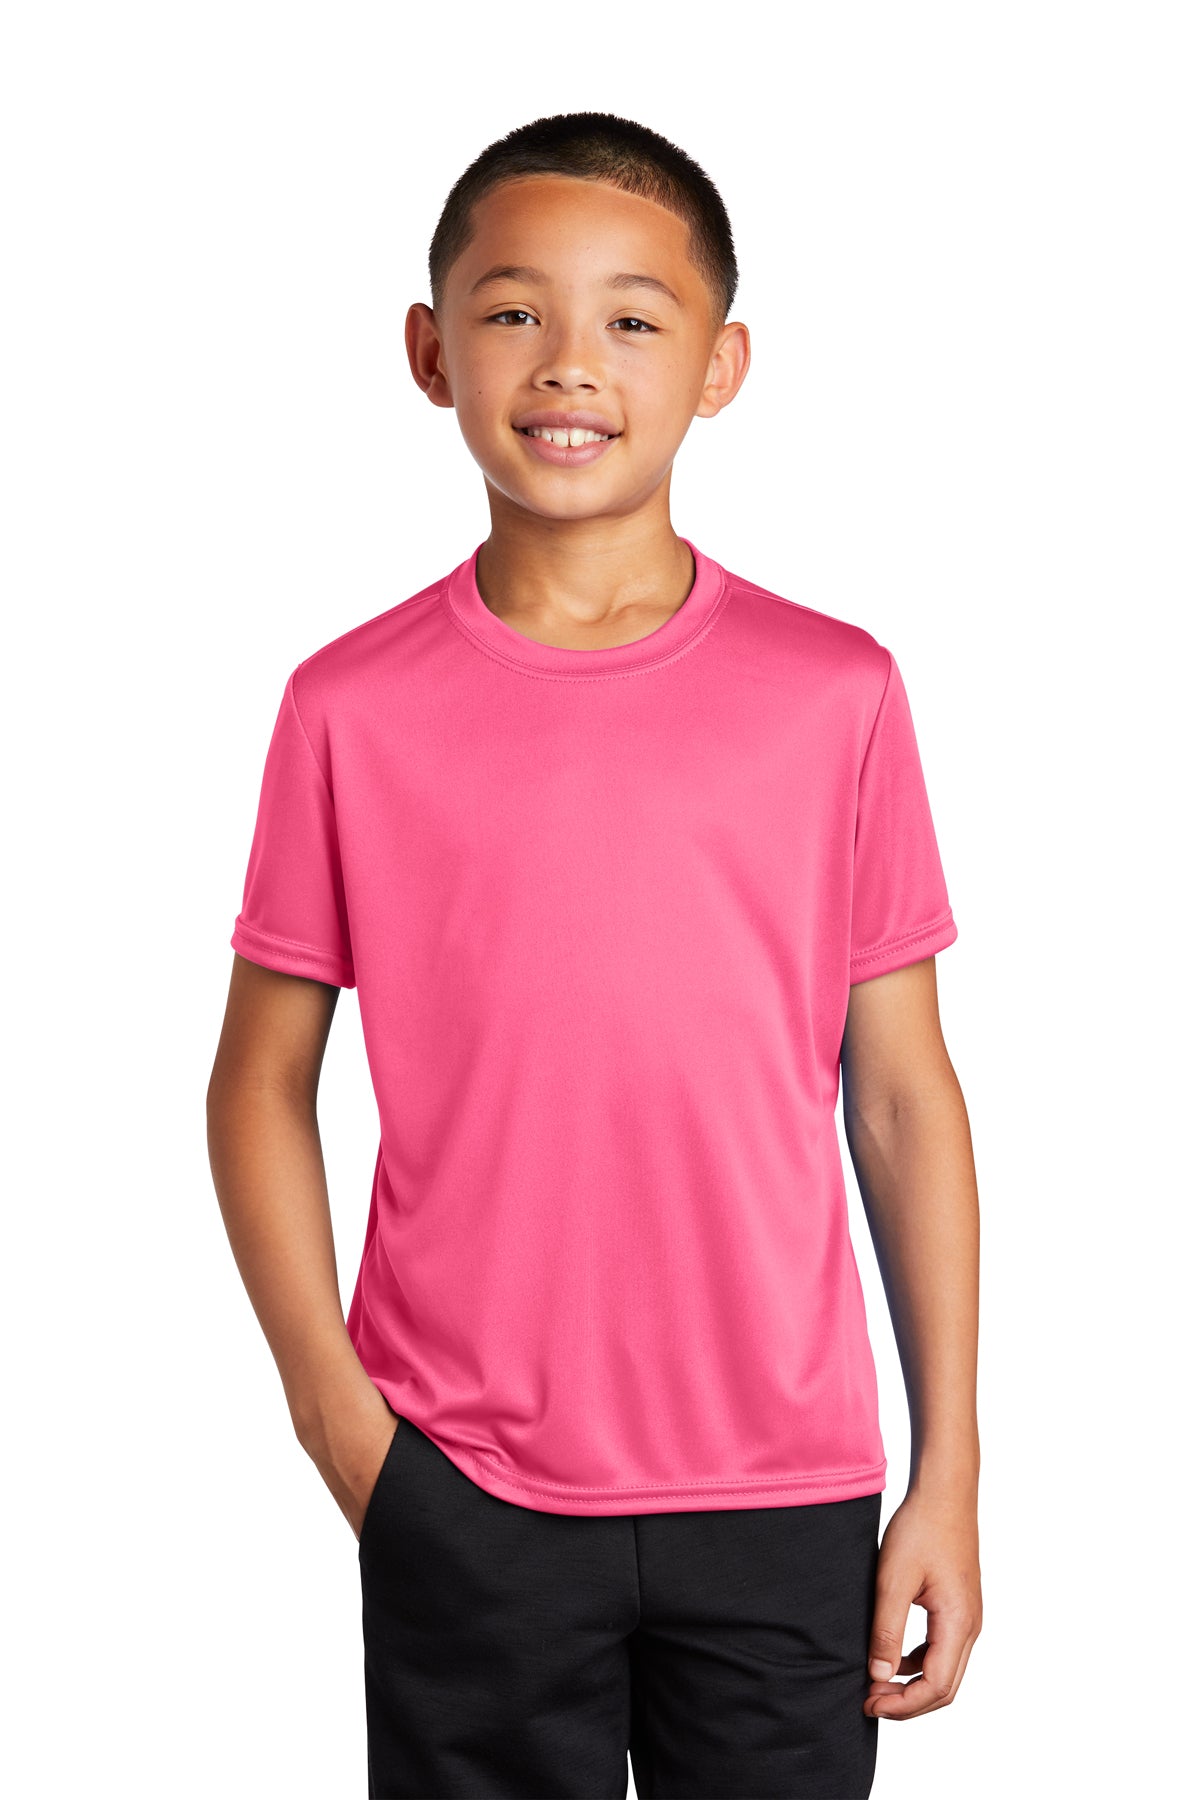 Port & Company Youth Performance Tee - M Neon Pink